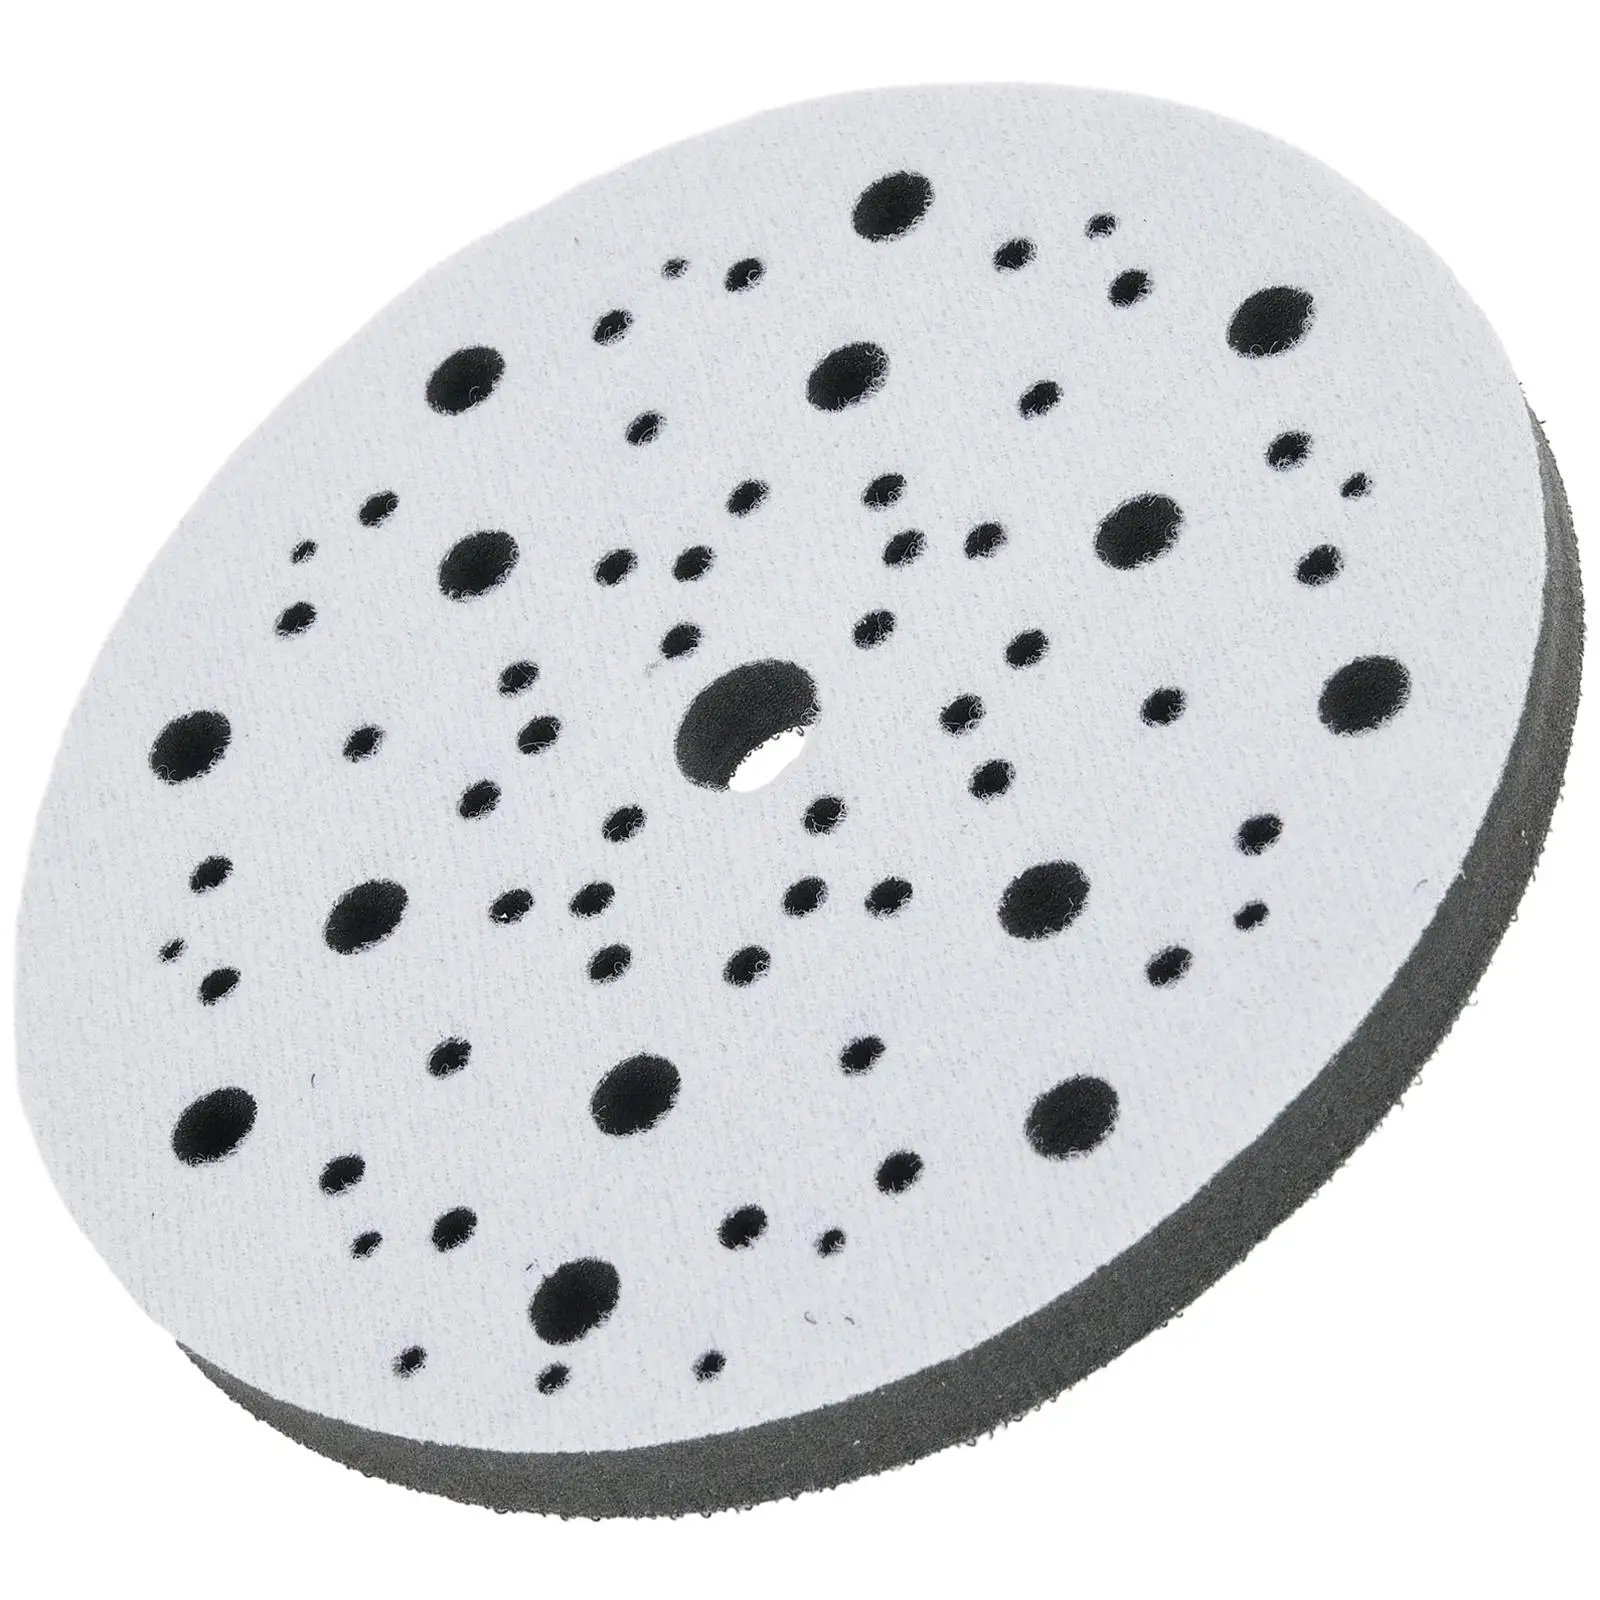 1PCS 6Inch 150mm 70 Holes Soft Sponge Interface Pad For Sanding Pads Hook&Loop Sanding Discs Sander Backing Pads Buffer 5 8 holes sanding pad assemblies fit backing is much better than plastic backings it is harder and more difficult to be broken